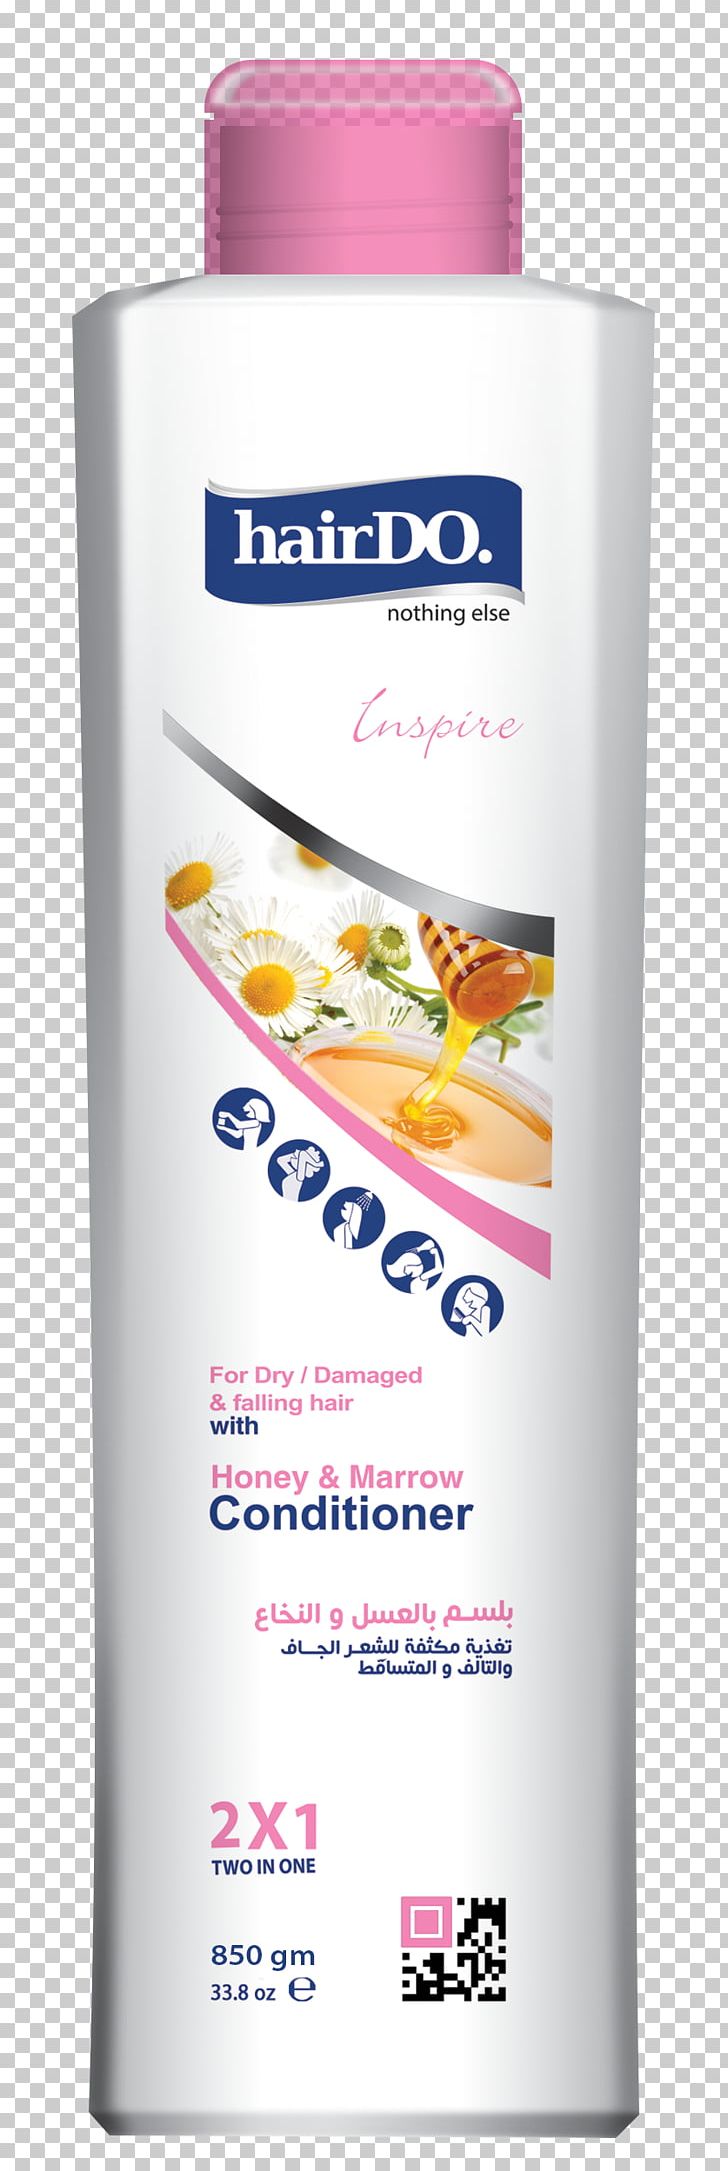 Lotion بوبانا Cosmetics Cosmeceutical Product PNG, Clipart, Business, Cosmeceutical, Cosmetics, Egypt, Egyptians Free PNG Download